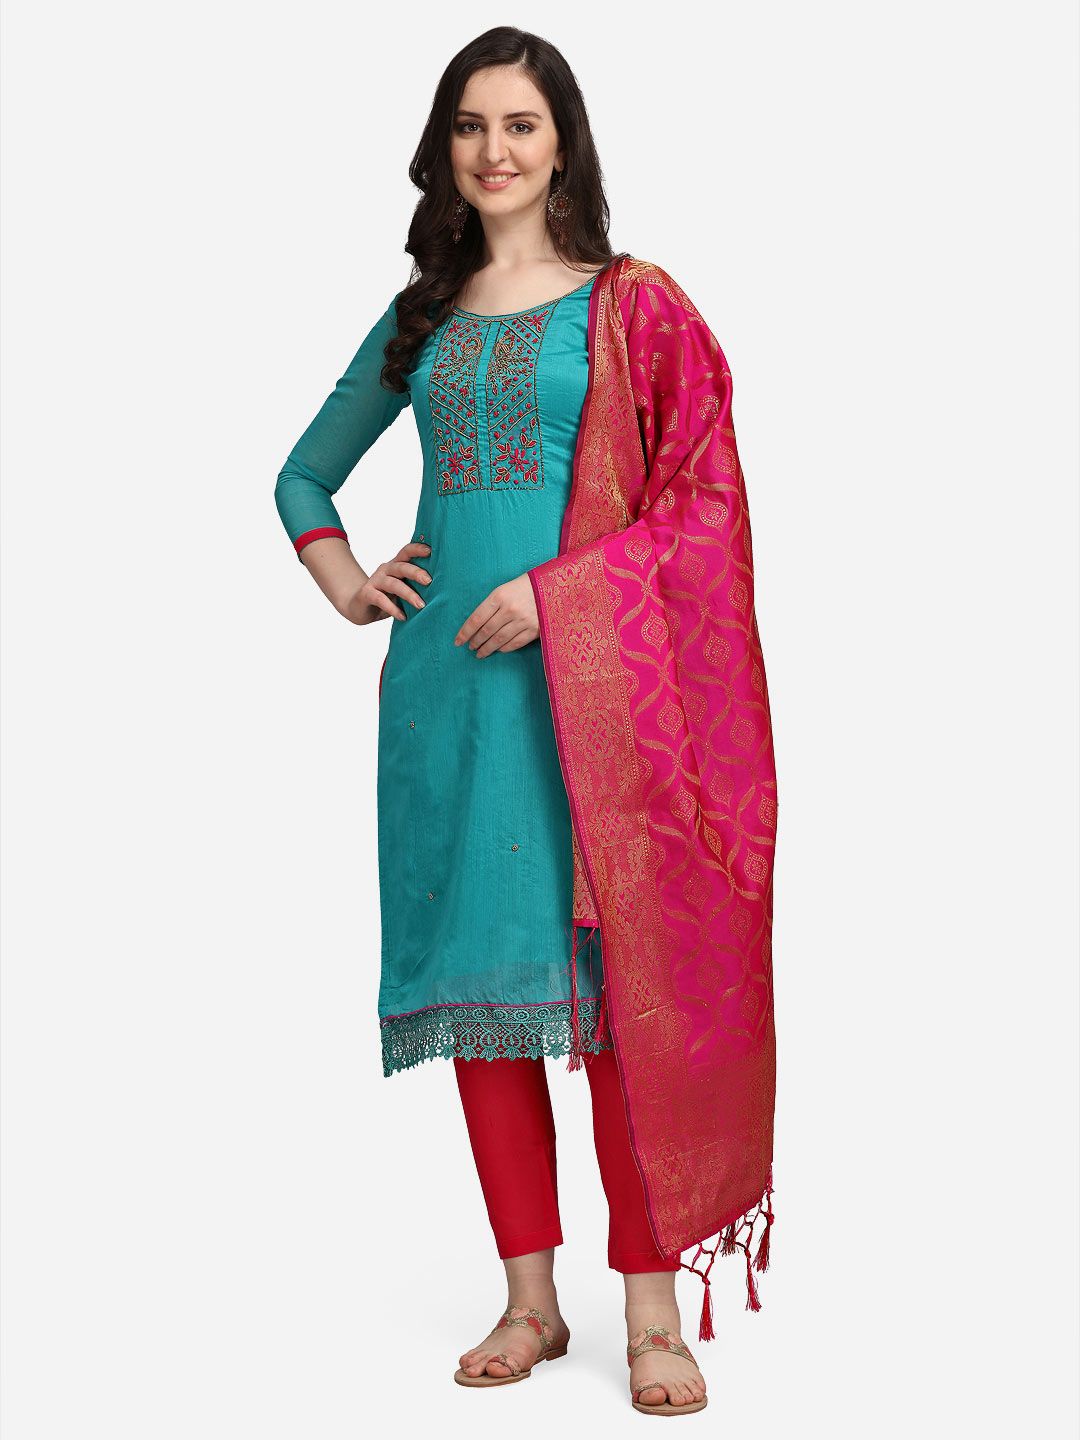 Ethnic Junction Teal Green & Maroon Embroidered Unstitched Dress Material Price in India